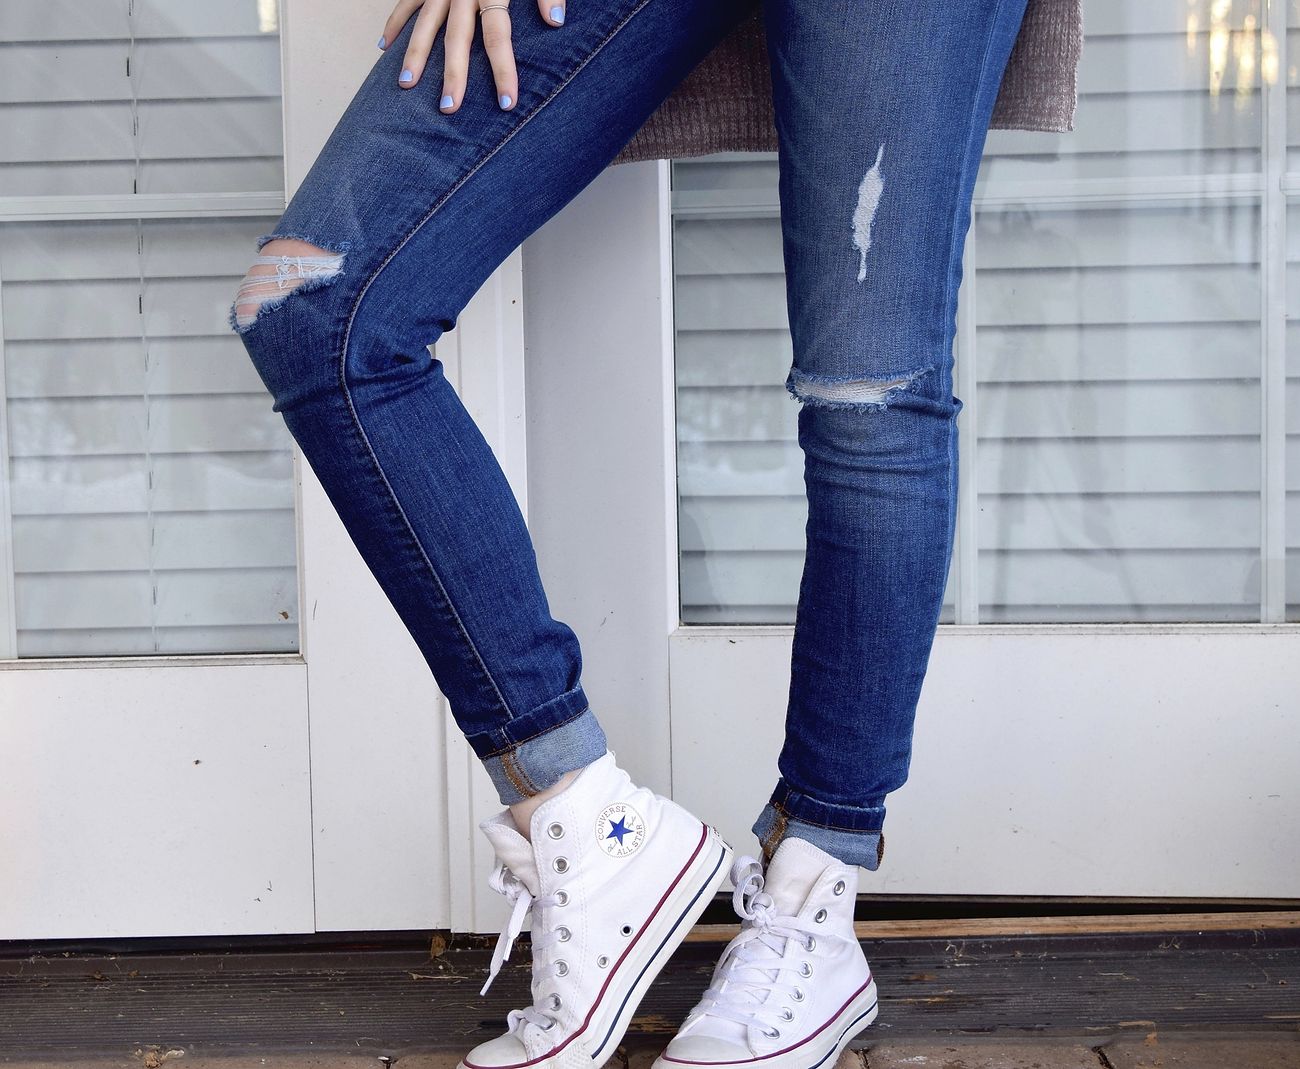 Free jeans and converse image